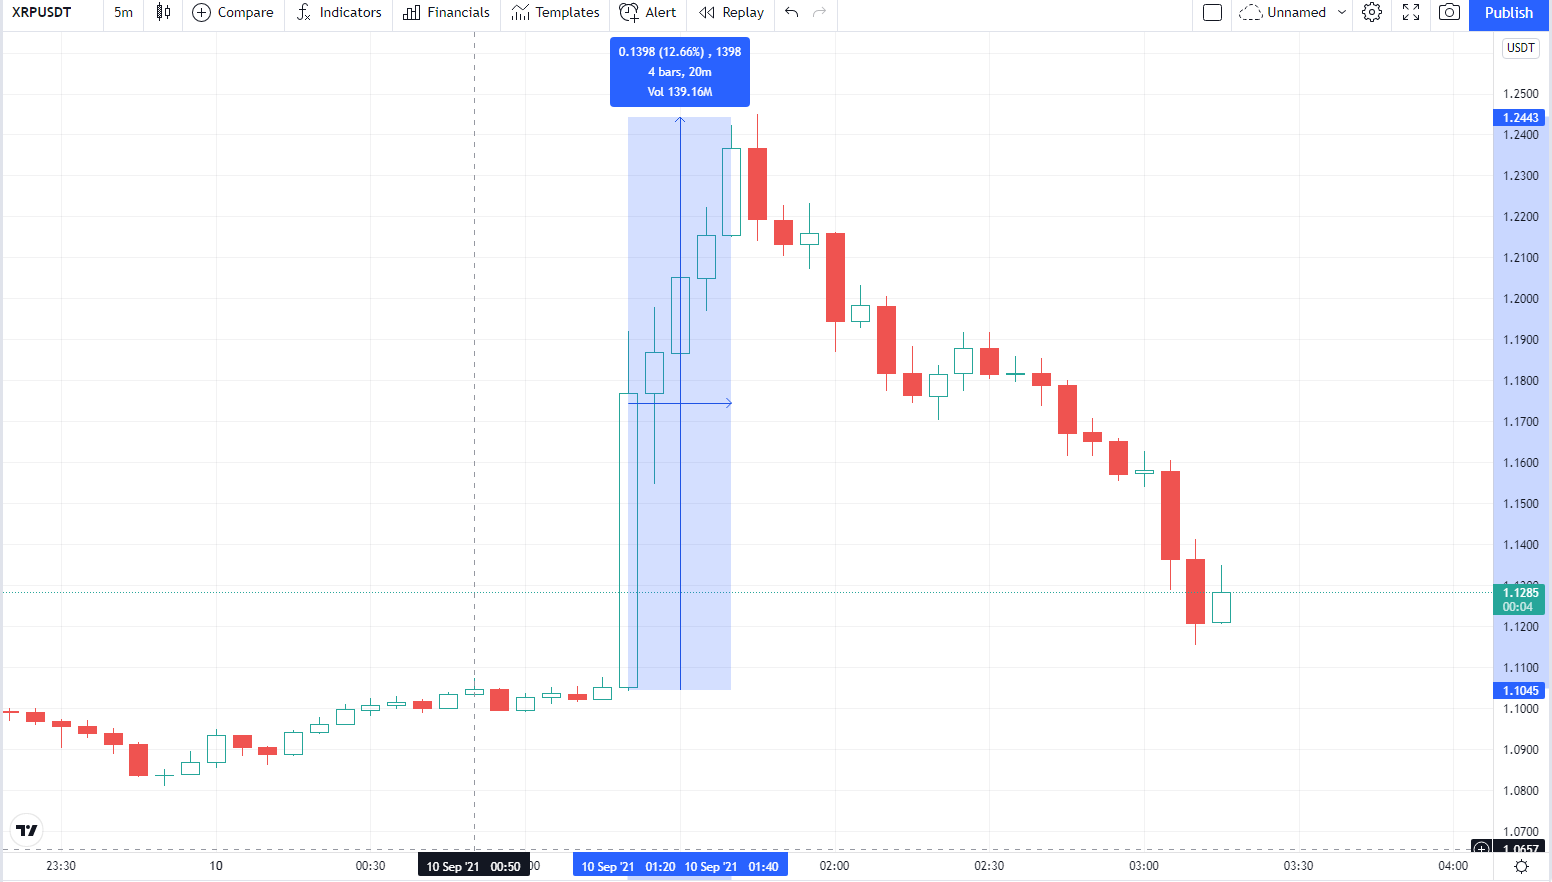 XRP USDT - Coinbase Pro - CryptoCurrencyChart